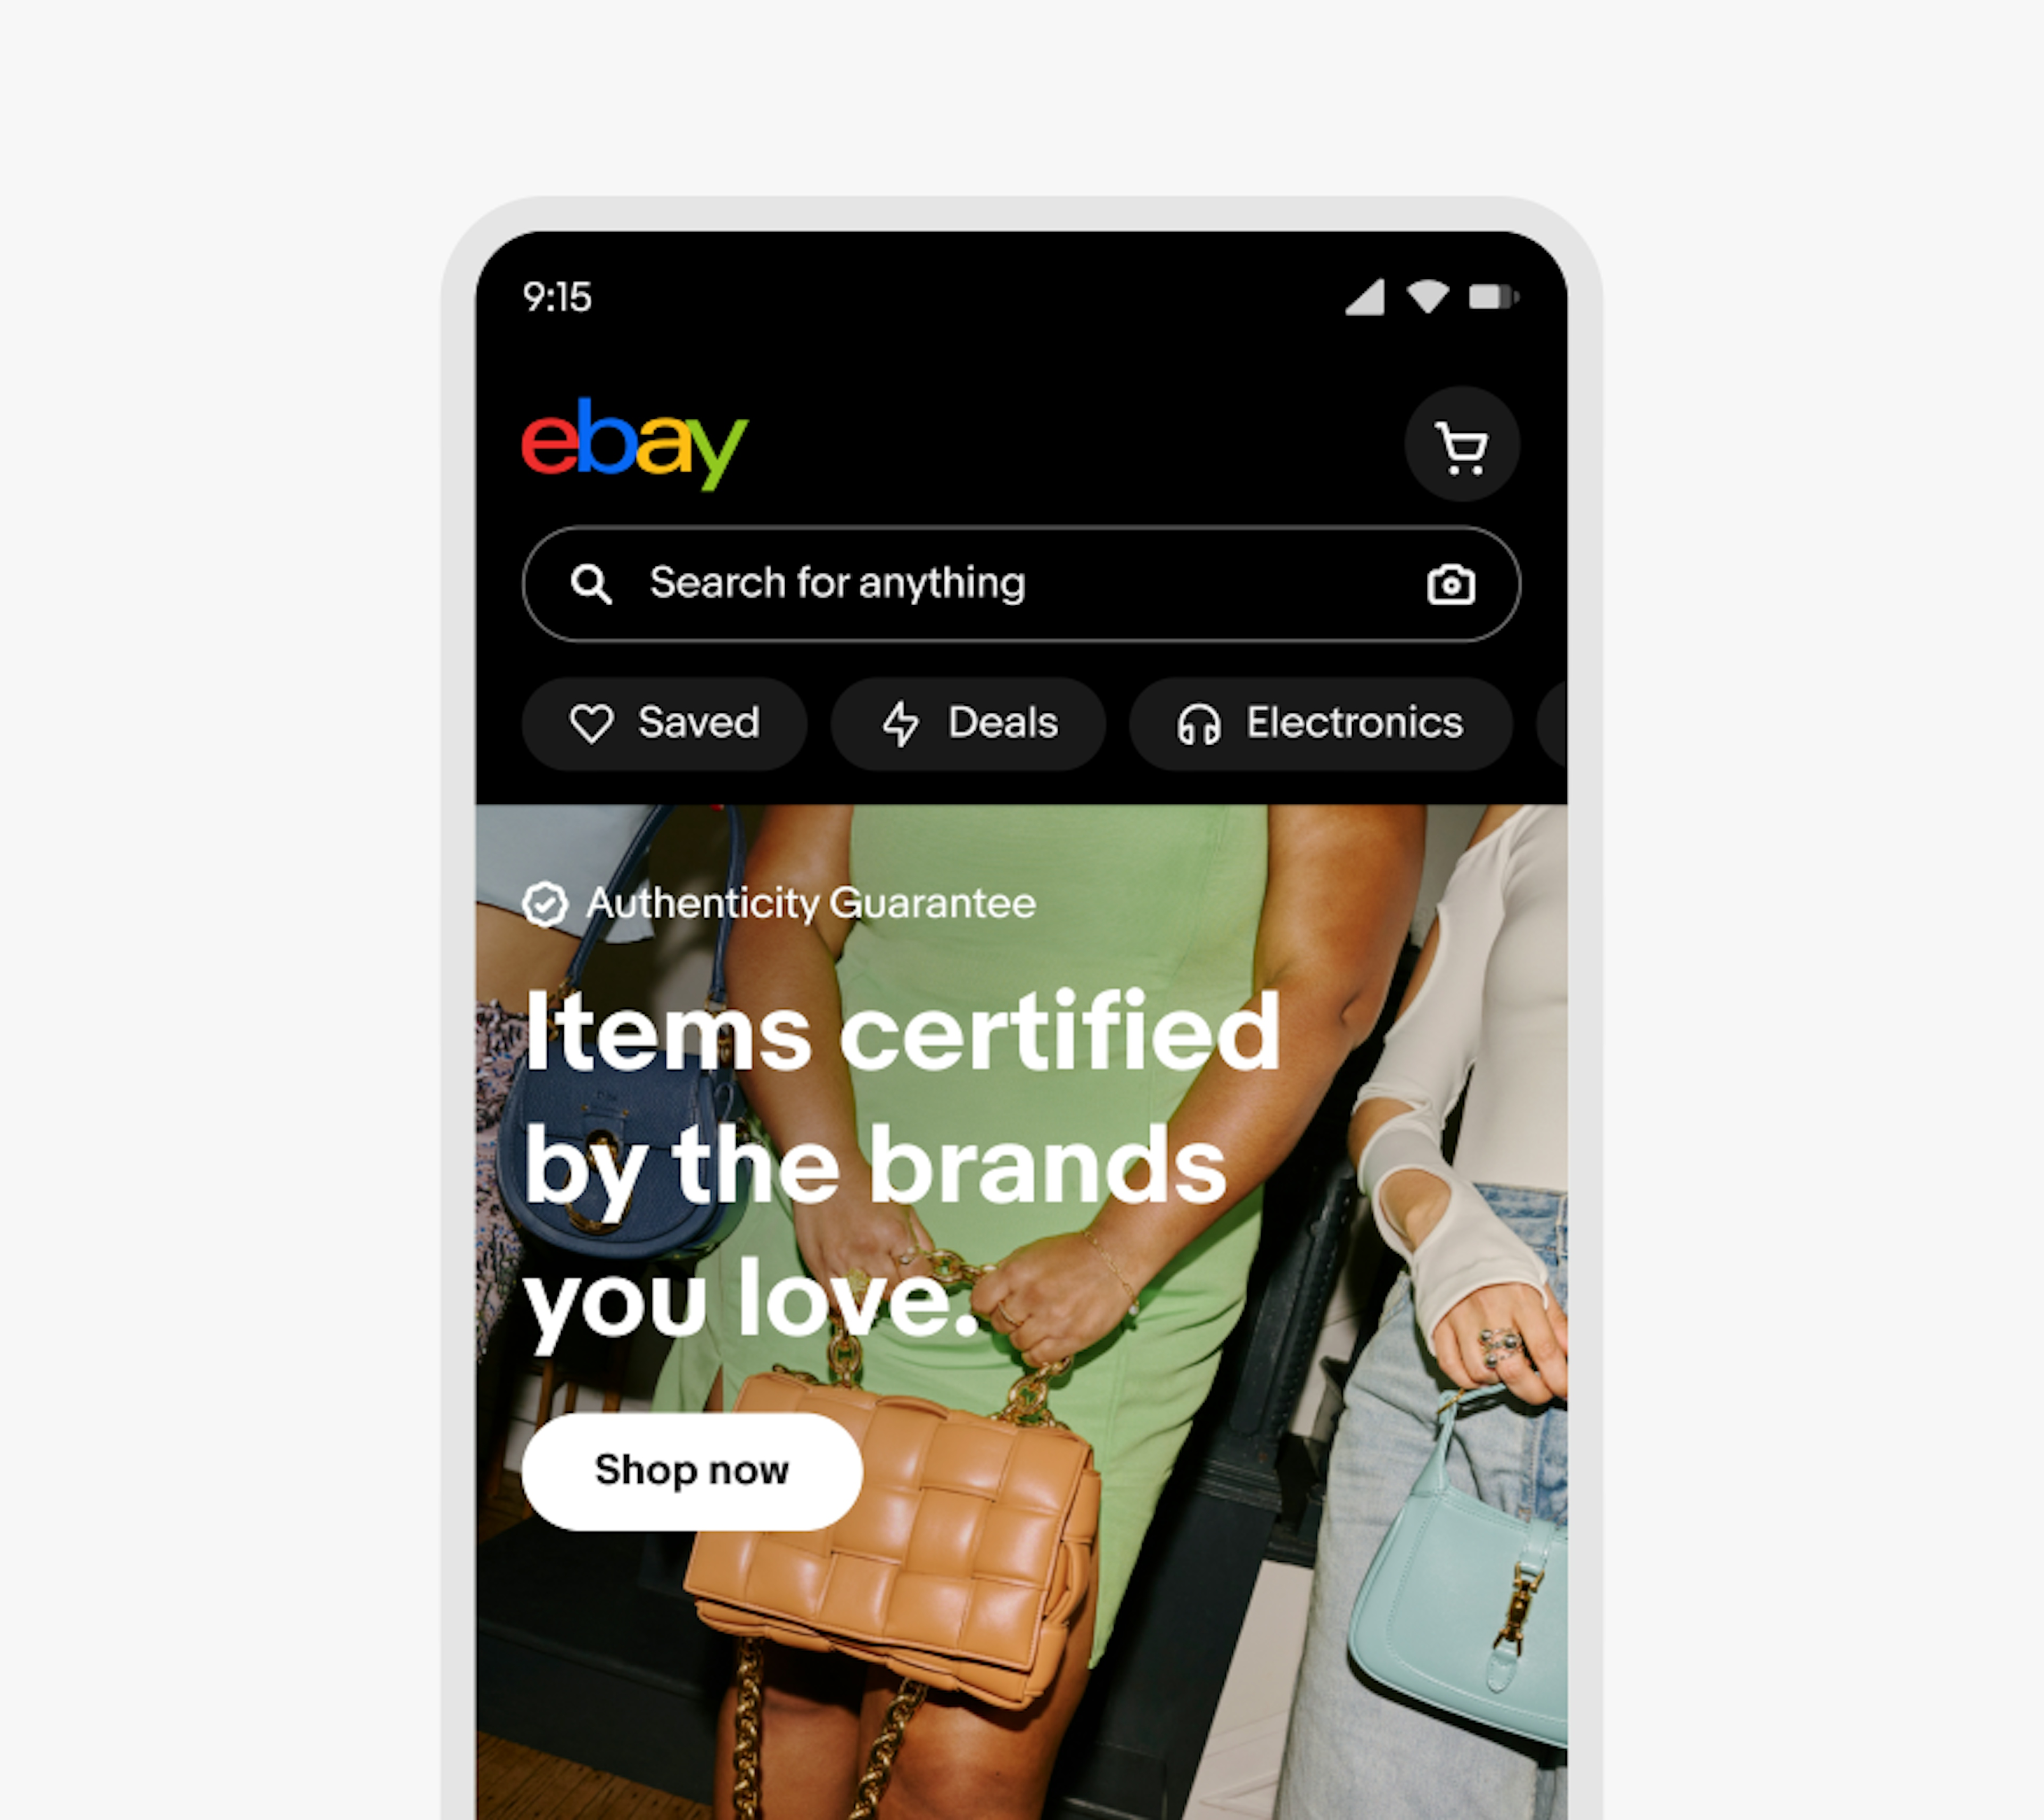 The eBay logo in the top navigation of the mobile app.